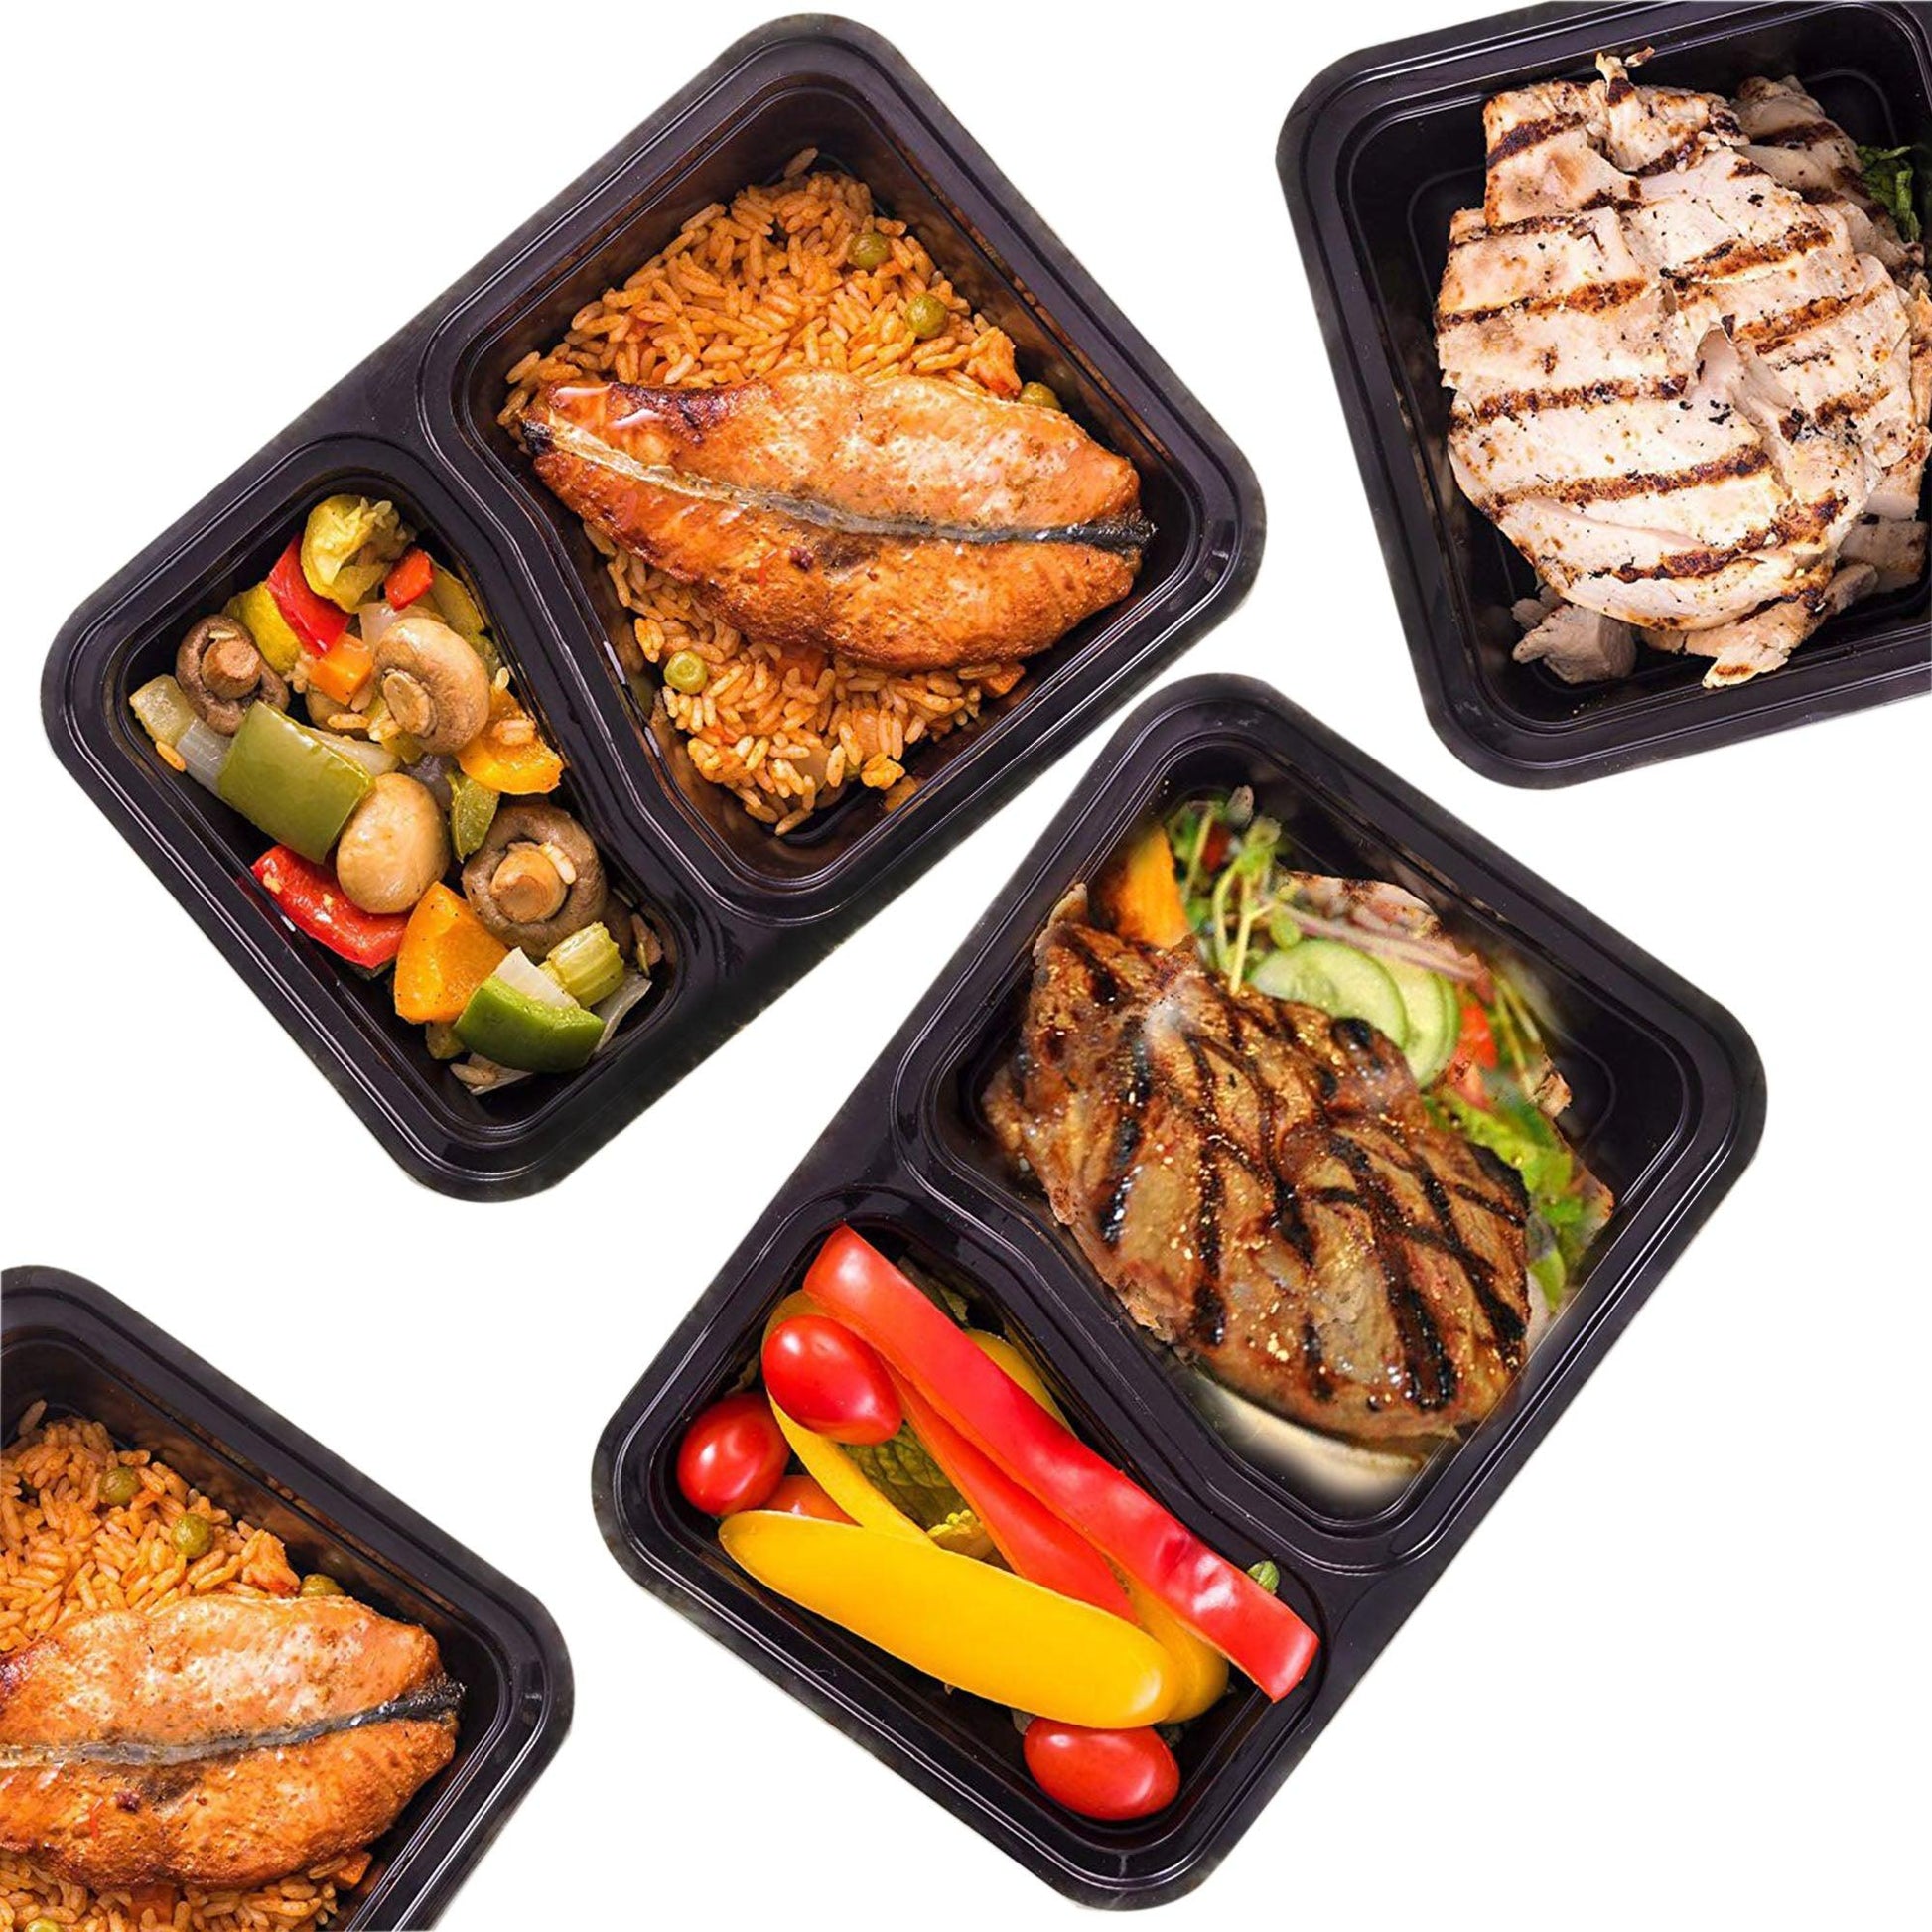 240 X Two Compartment Meal Prep Container Bulk Saving Pack - Jugglebox Australia